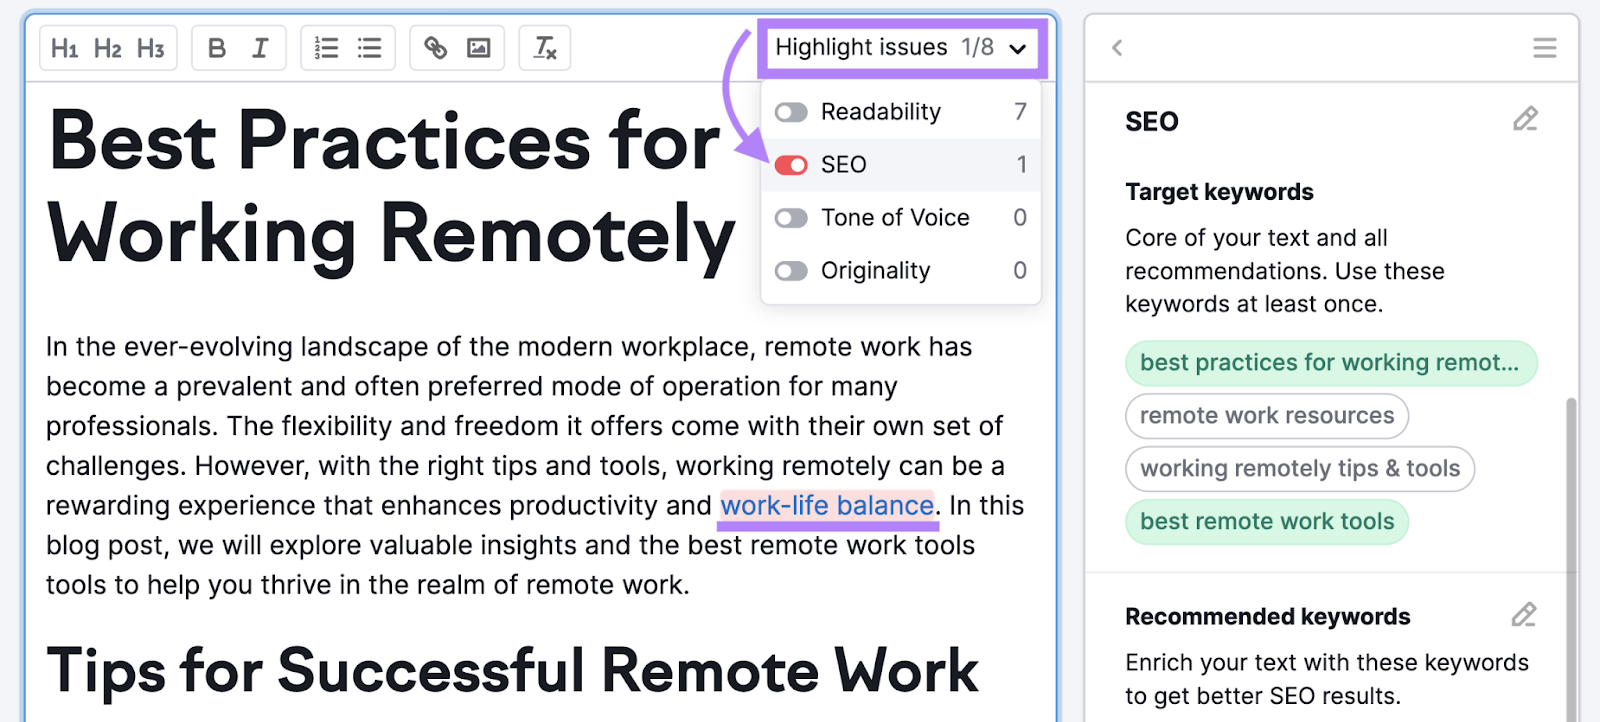 "SEO" selected under “Highlight Issues" drop-down menu